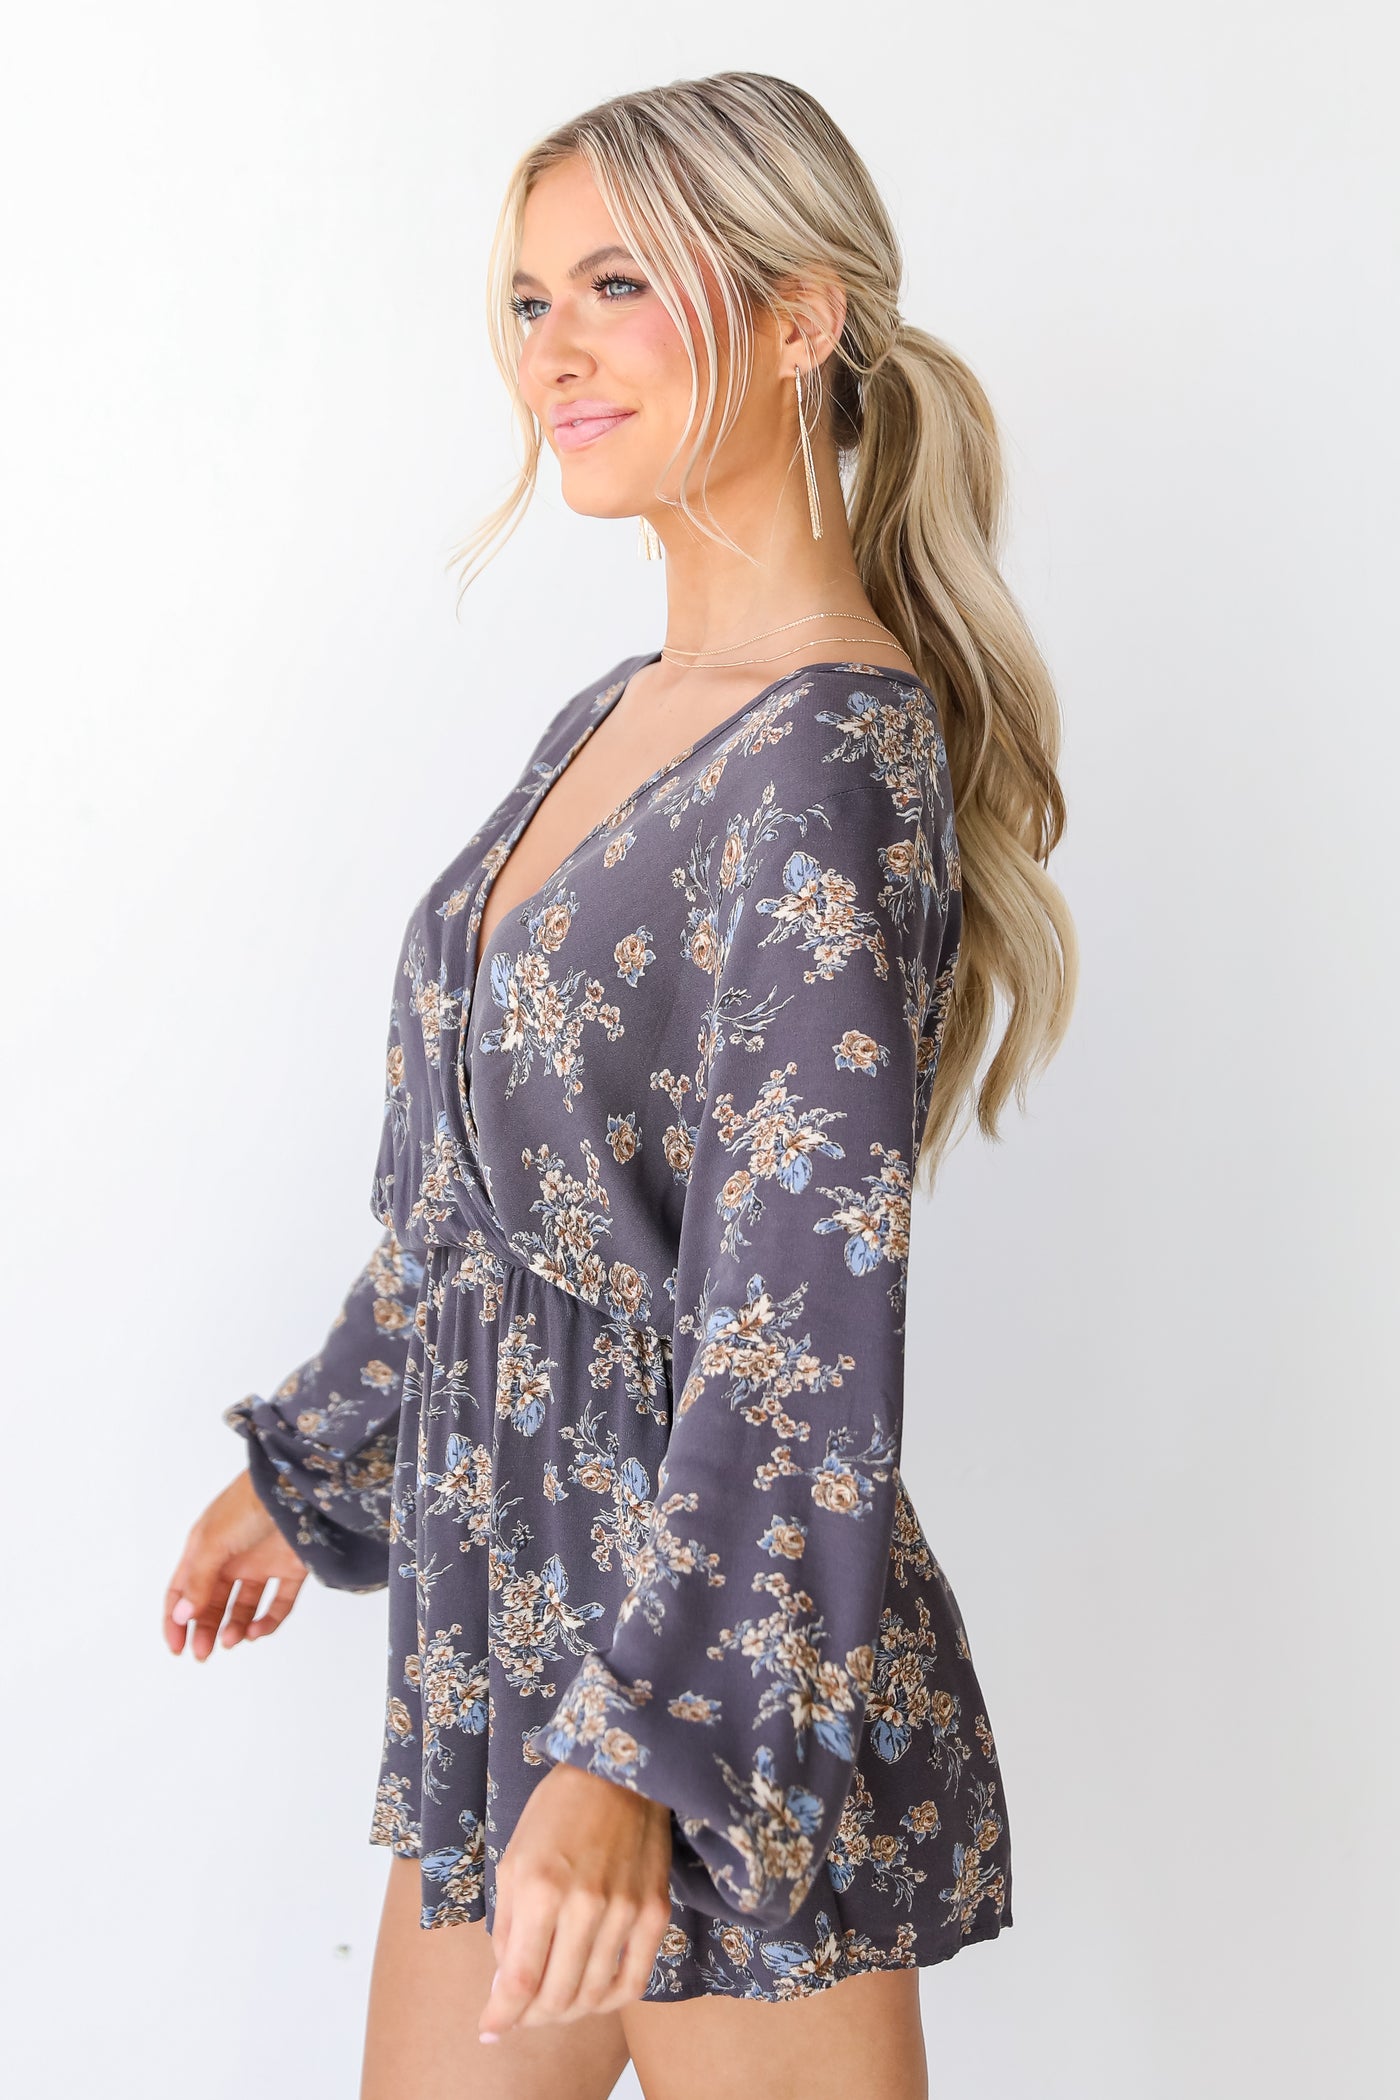 Floral Romper side view